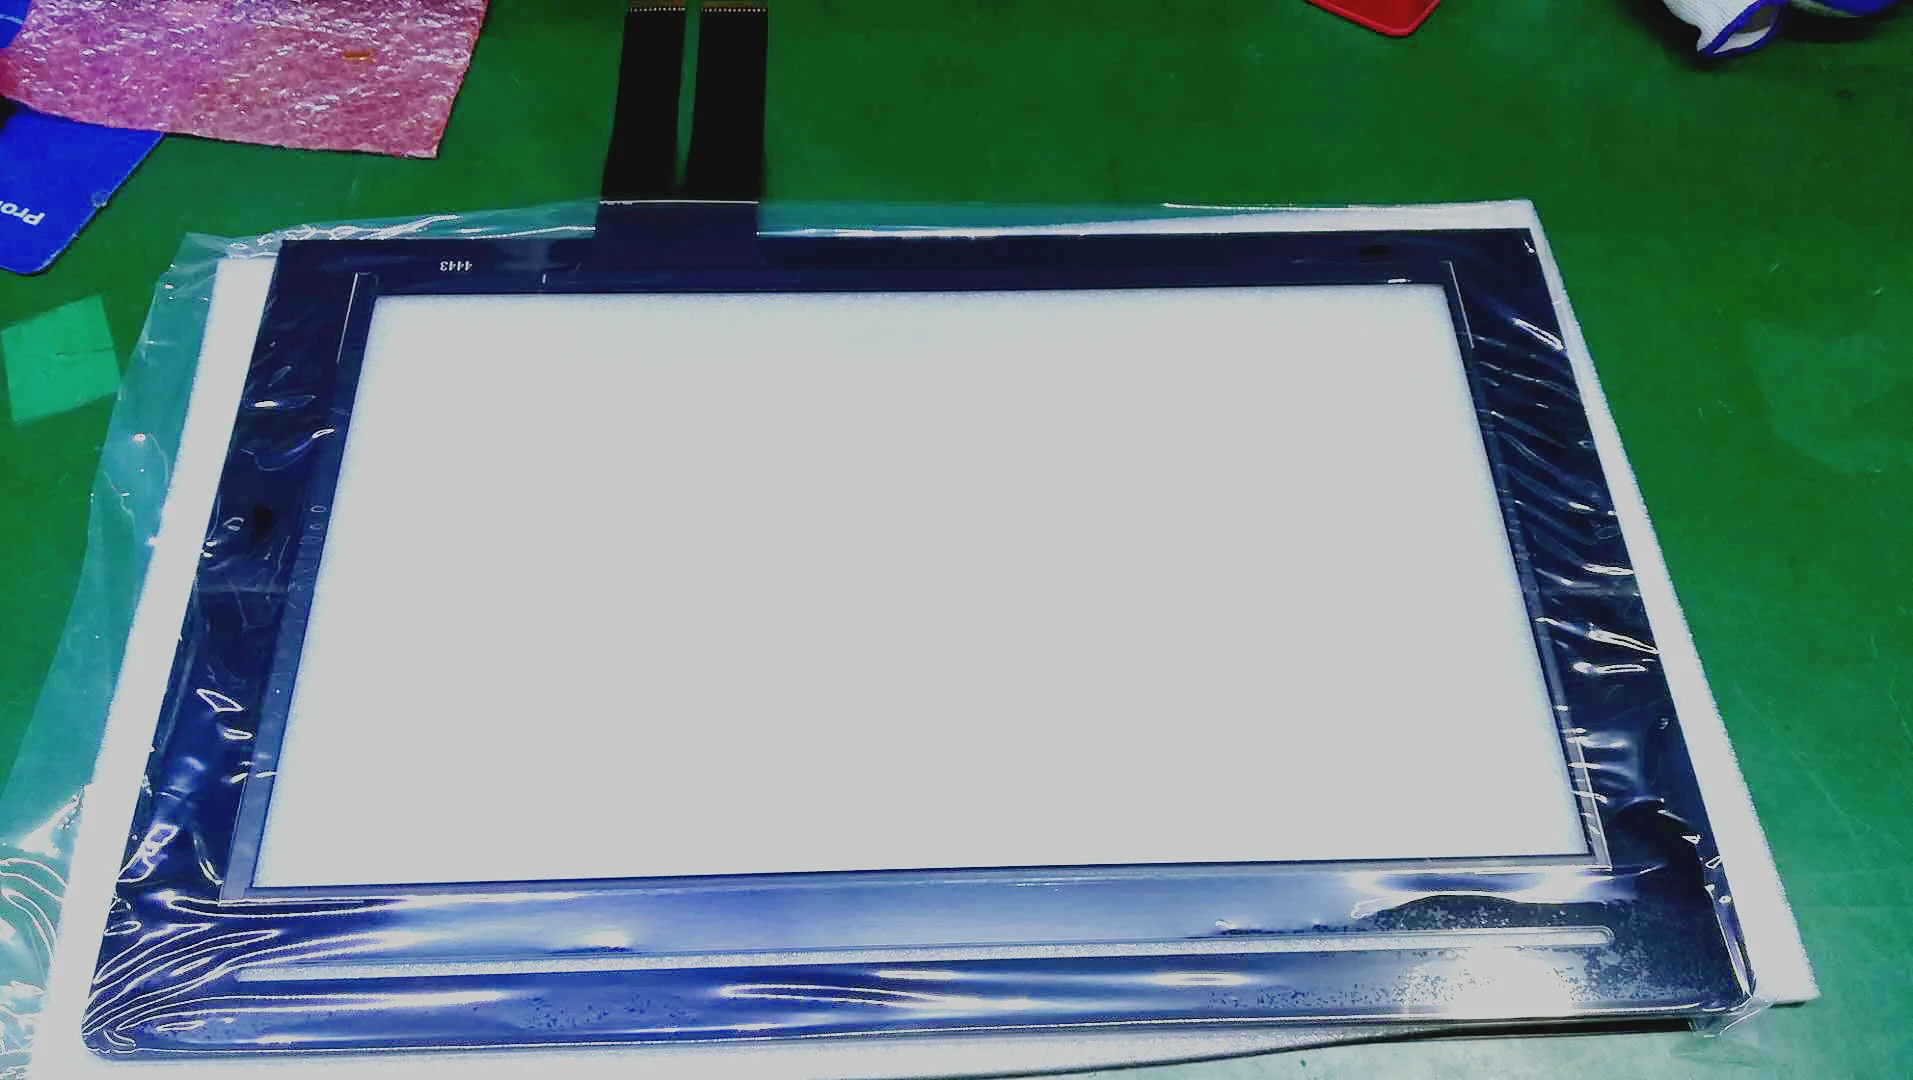 Waterproof Touch Screen 10.1, 10.4, 12.1, 15, 15.6, 17, 17.3, 18.5, 19, 21.5, 23, 23.6, 27, 32 Inch PACP Capacitive Panel Kit